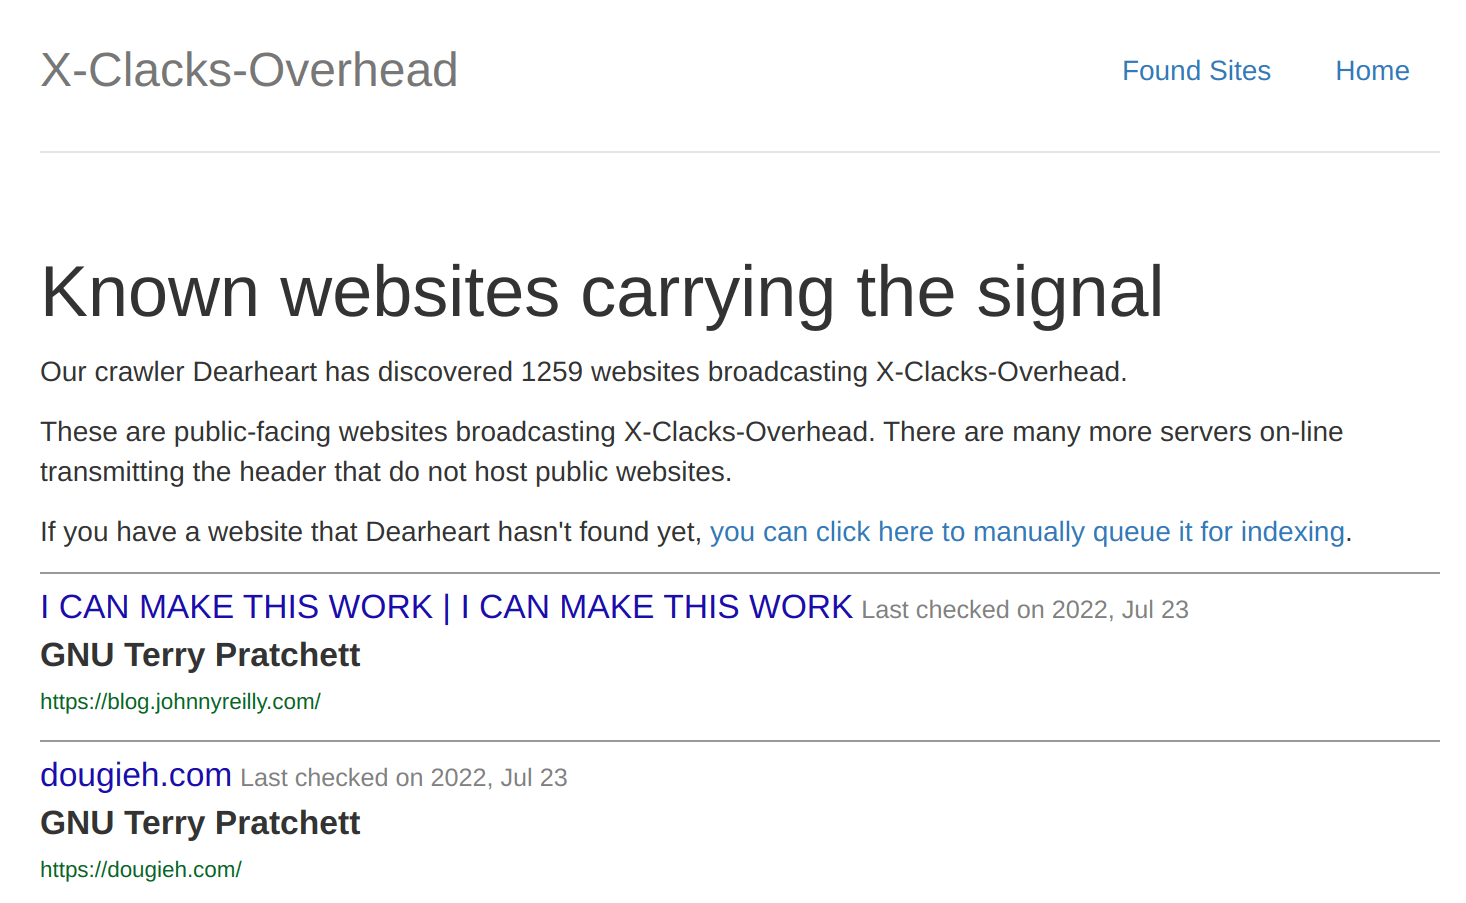 screenshot of https://xclacksoverhead.org/listing/the-signal showing this blog being listed